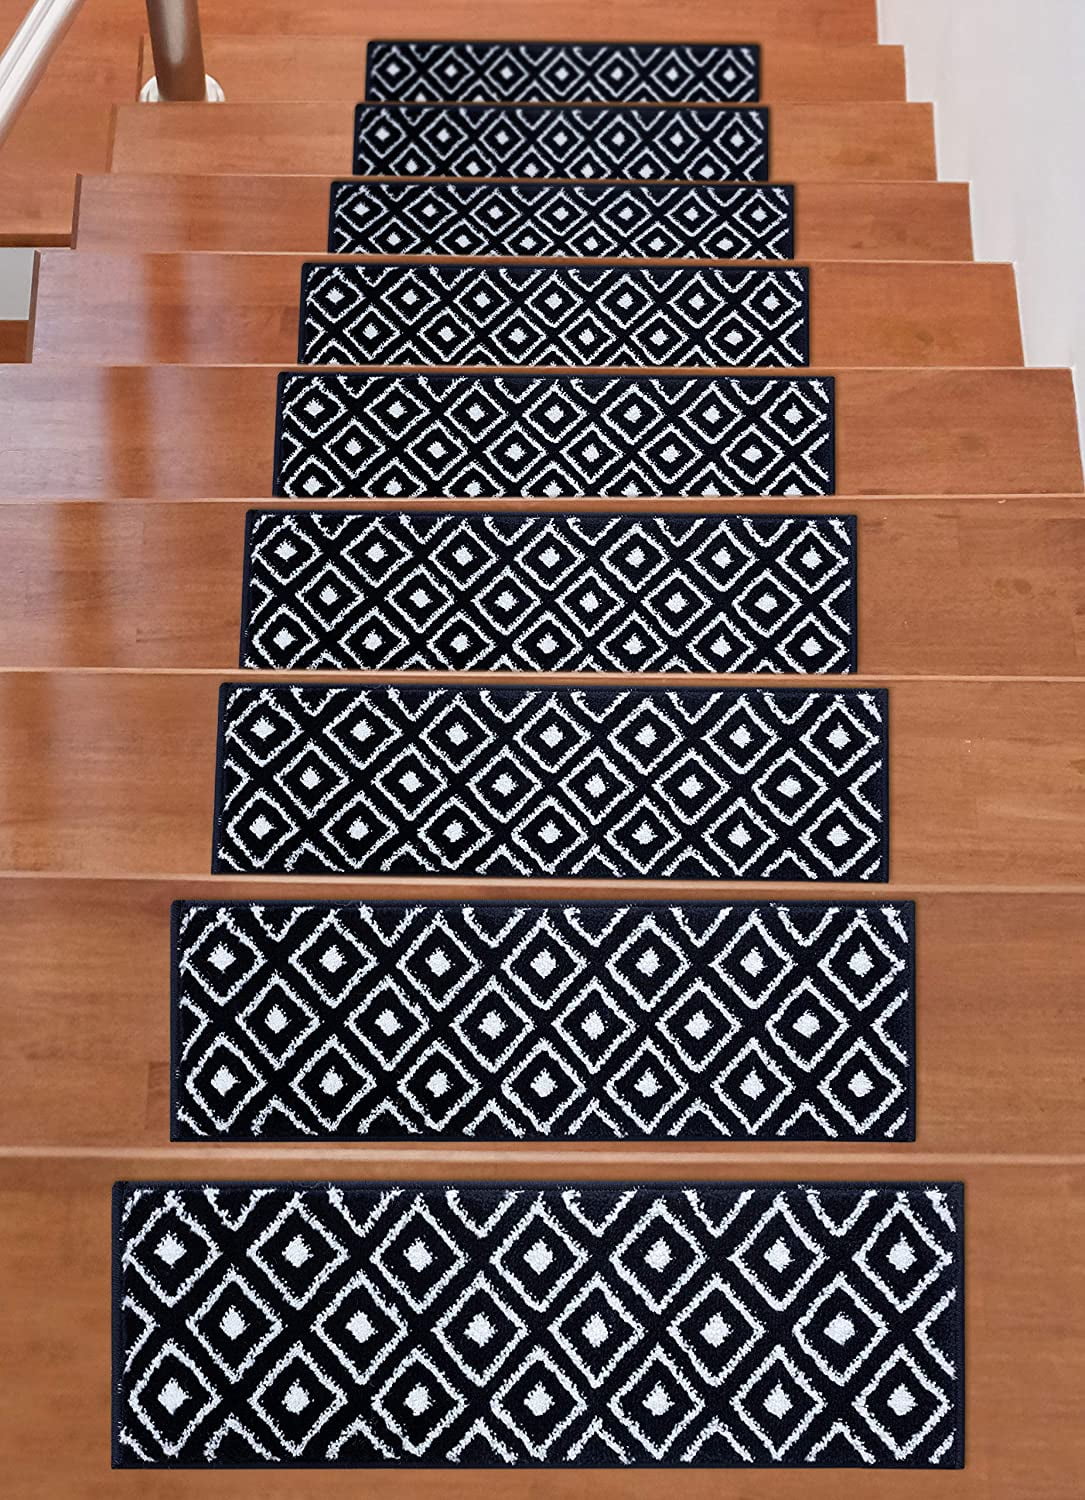 Details about   13 = STEP  9" x 30"  Stair Treads Staircase WOVEN WOOL . 